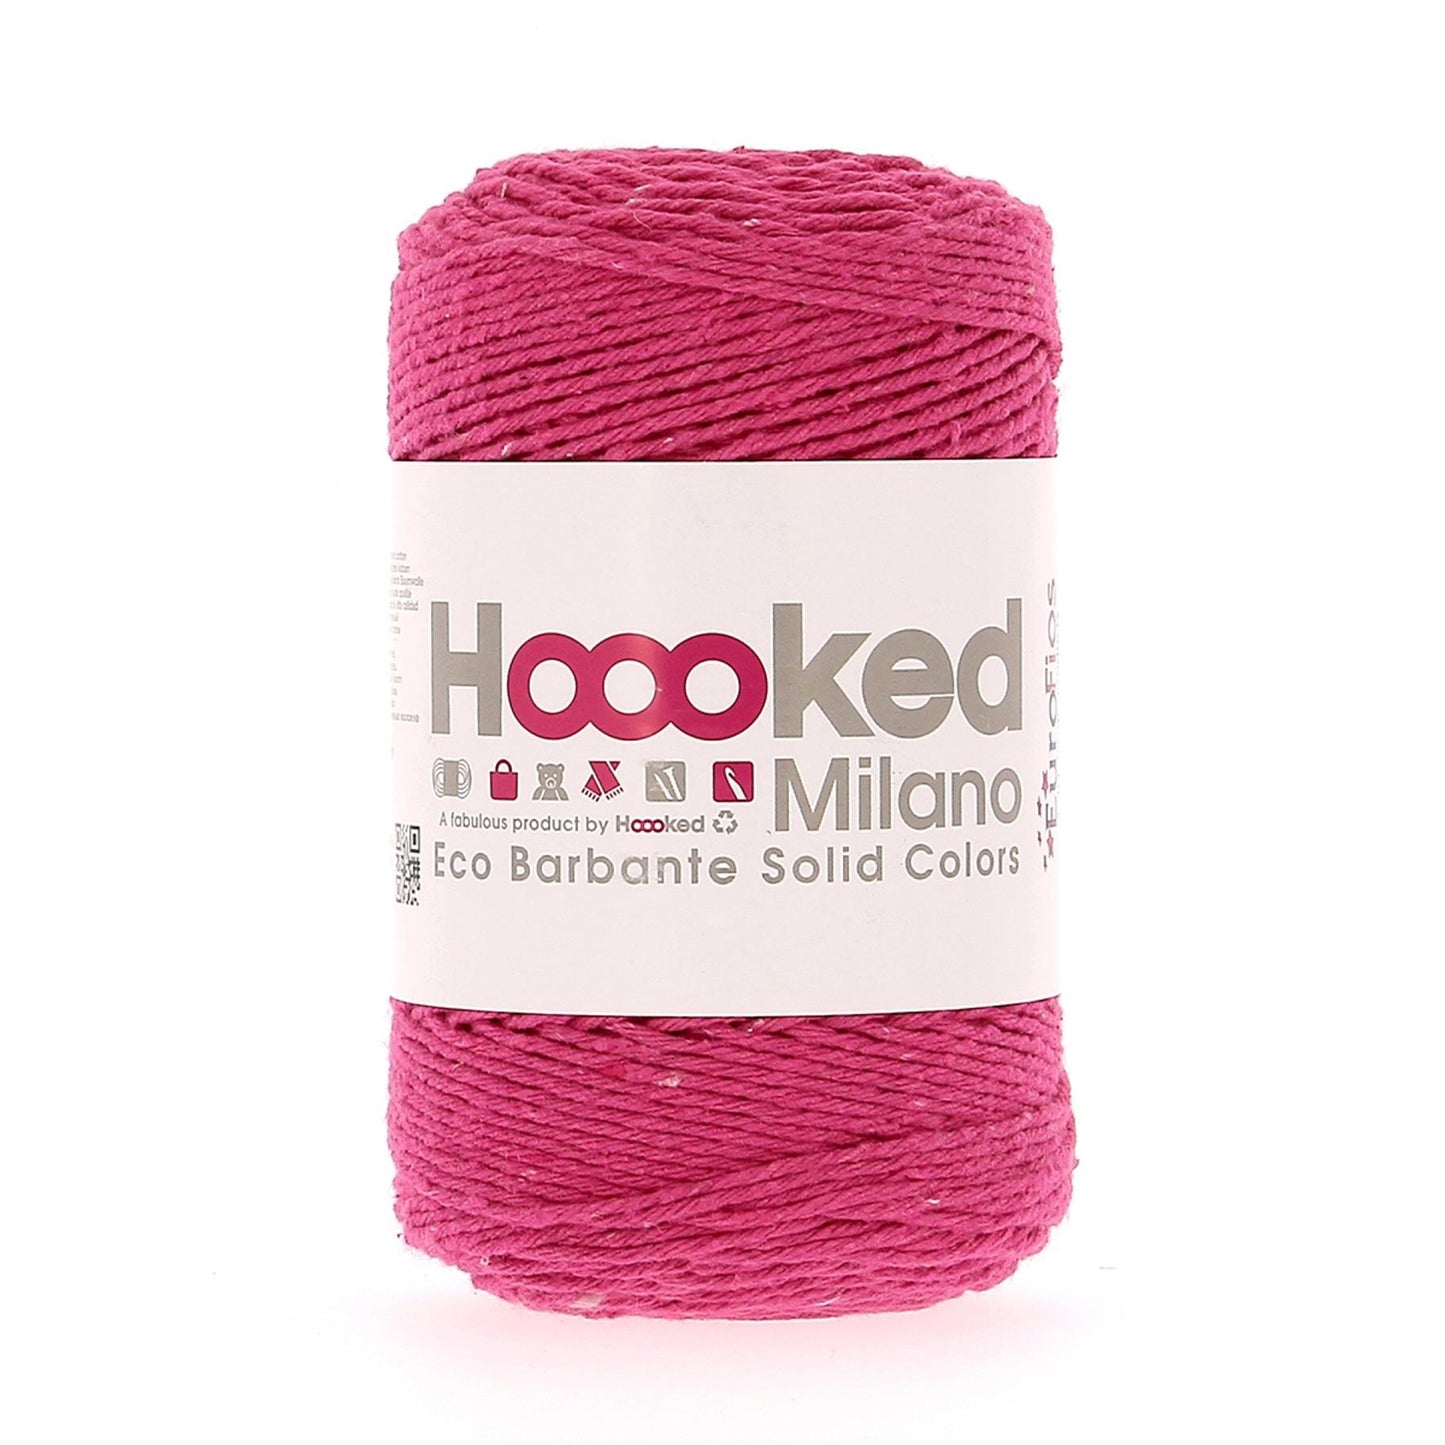 [Hoooked] R550 Eco Barbante Milano Punch Cotton Yarn - 204M, 200g